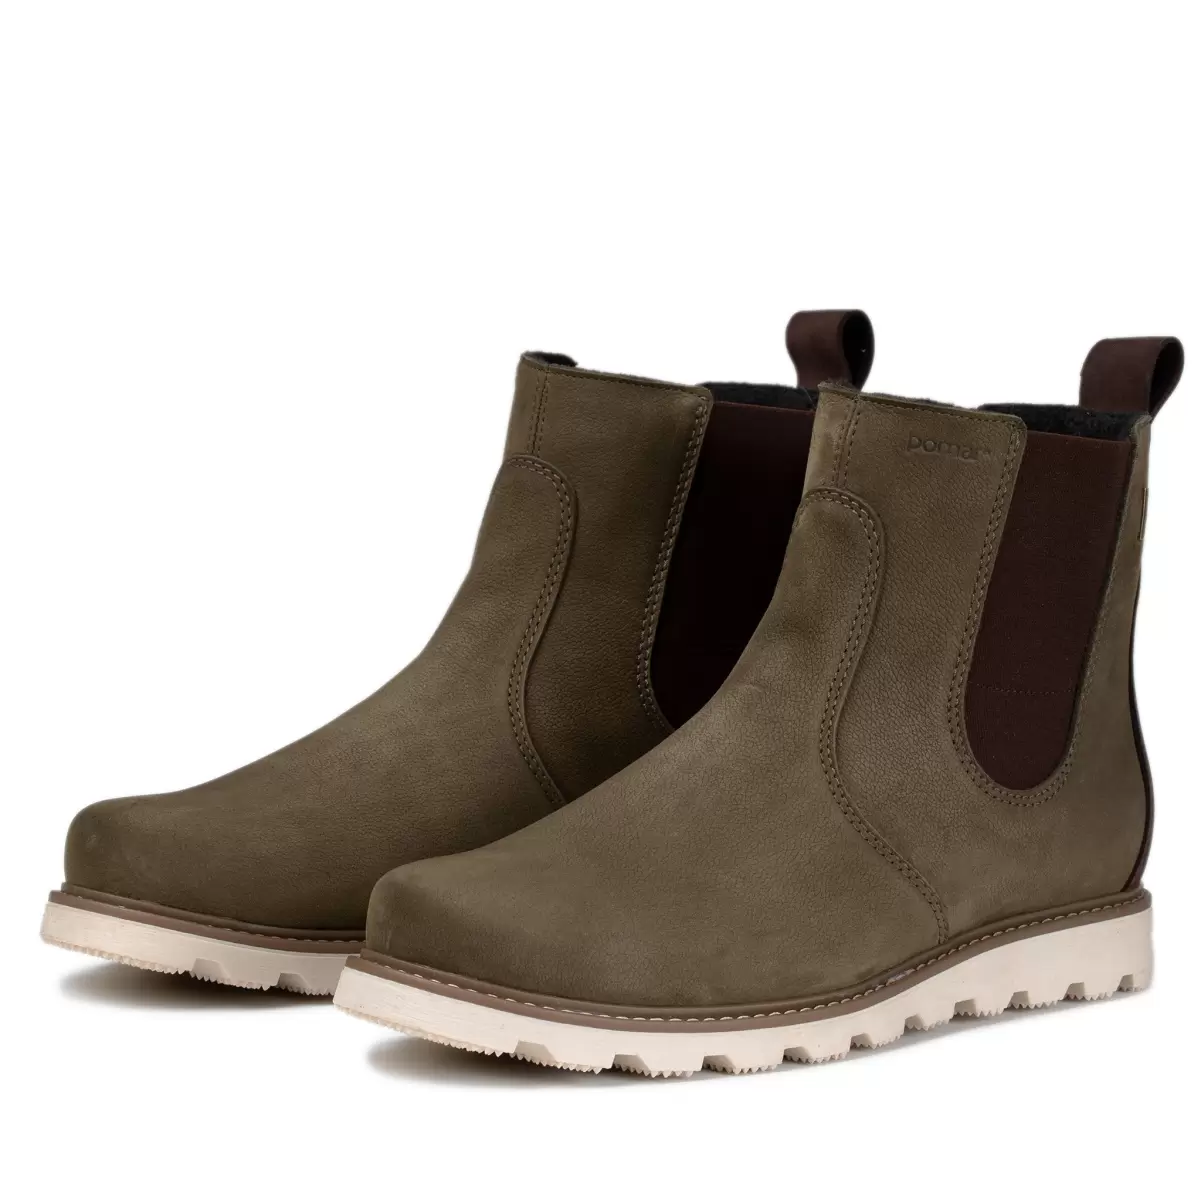 Raja Men's Gore-Tex® Chelsea Boots Pomarfin Oy Ankle Boots Men Olive Green Nubuck/Wht.sole - 2